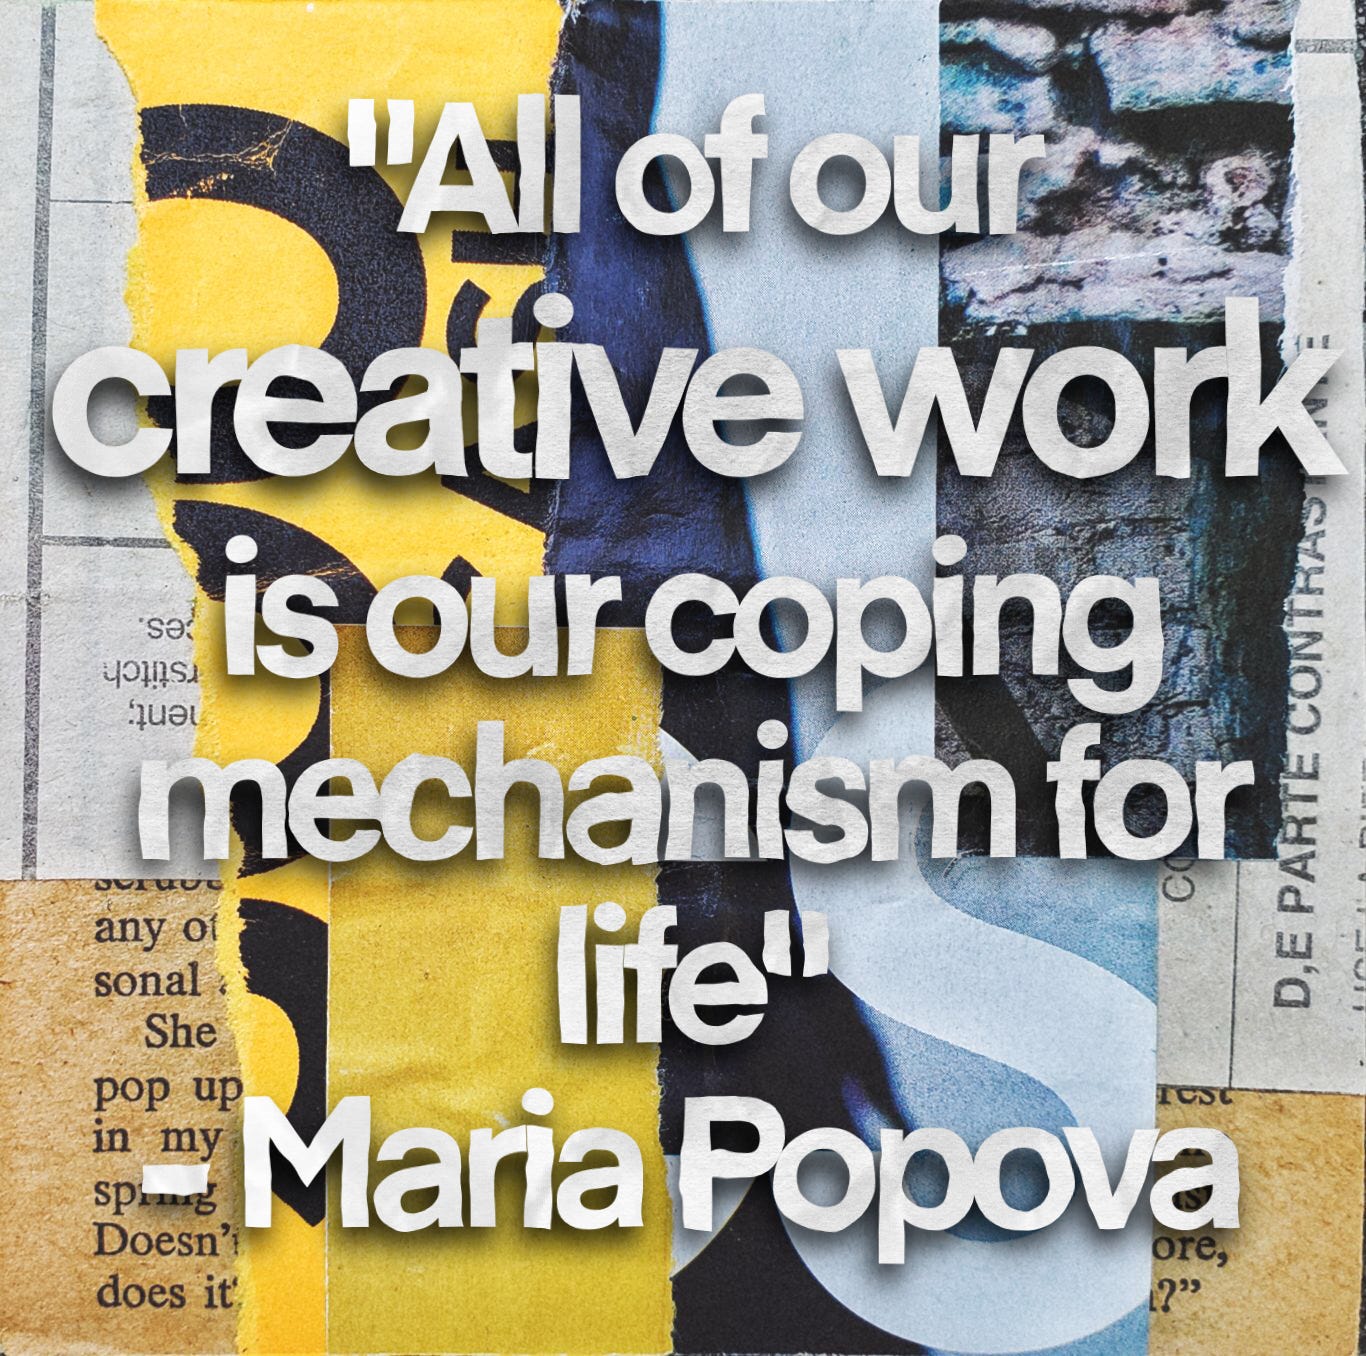 a collage of paper scraps with a Maria Popova quote that sas: "All of our creative work is our coping mechanism for life"